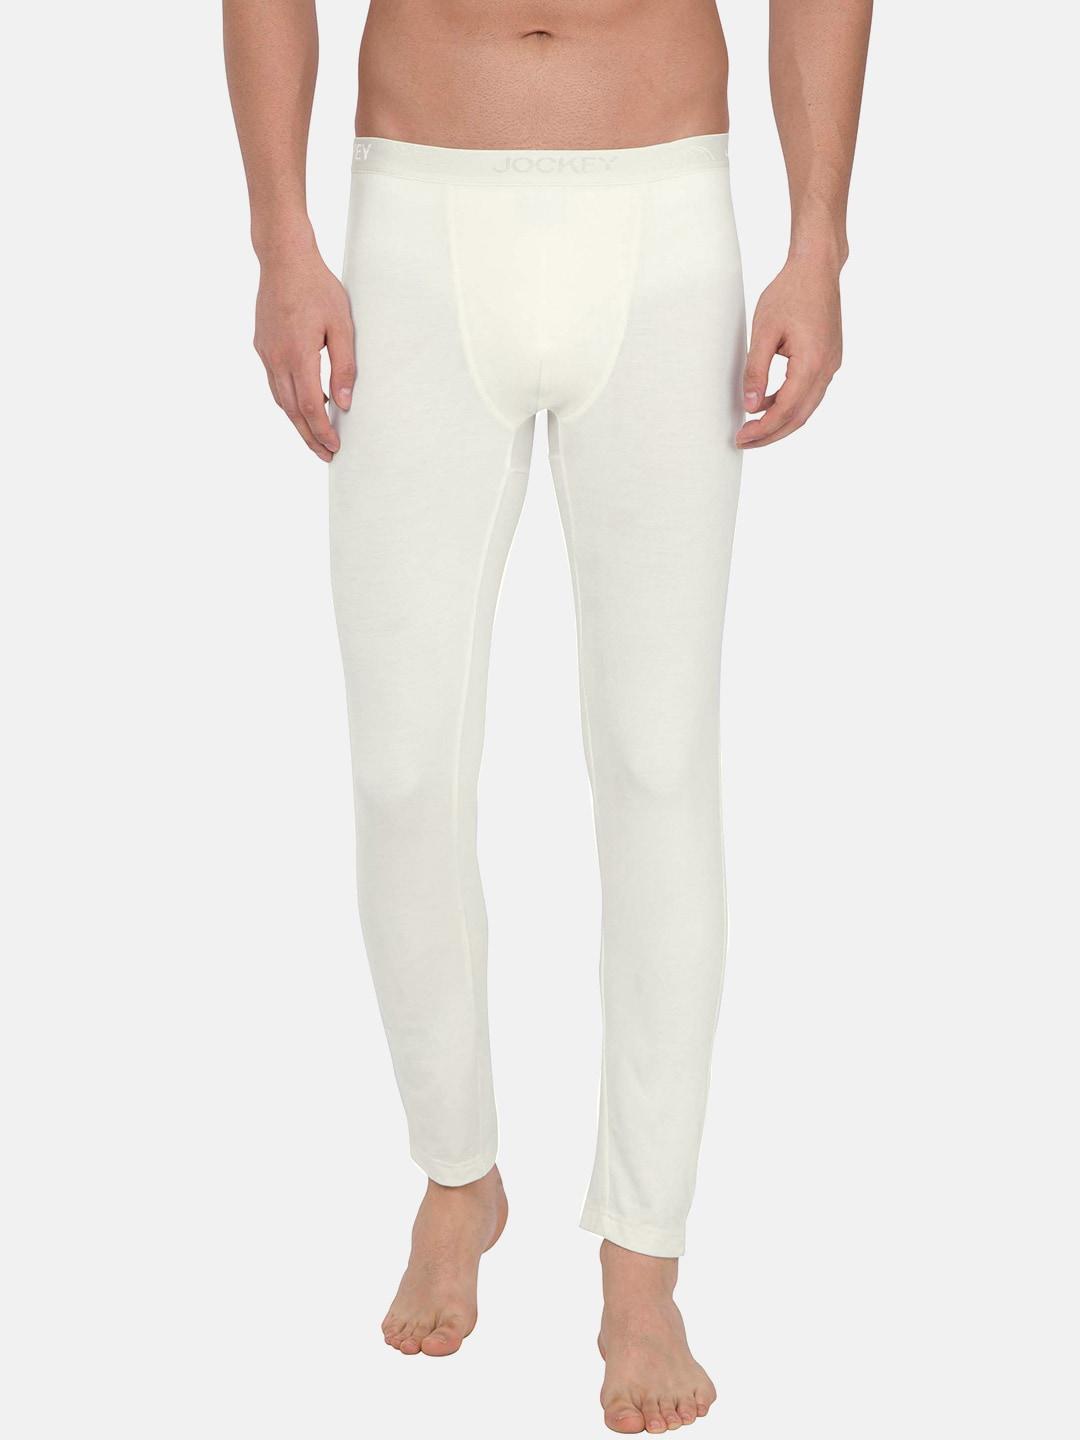 jockey-thermals-men-cream-coloured-solid-thermal-bottoms-2622-0105